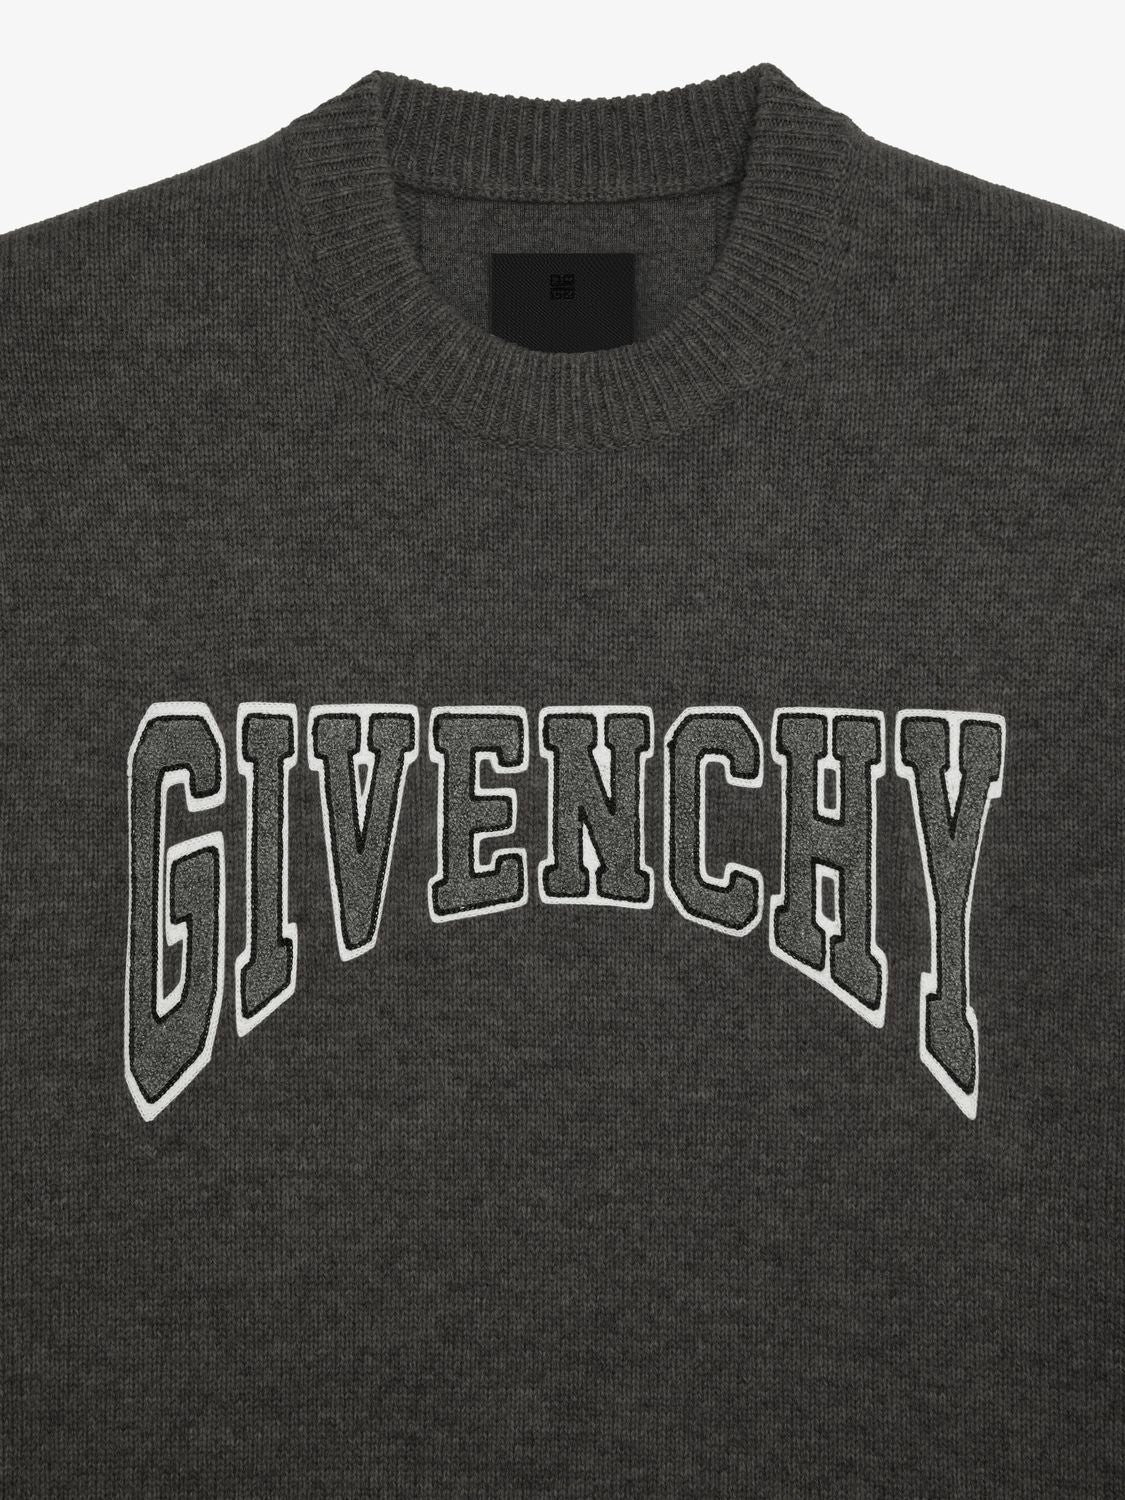 015 GIVENCHY SWEATER